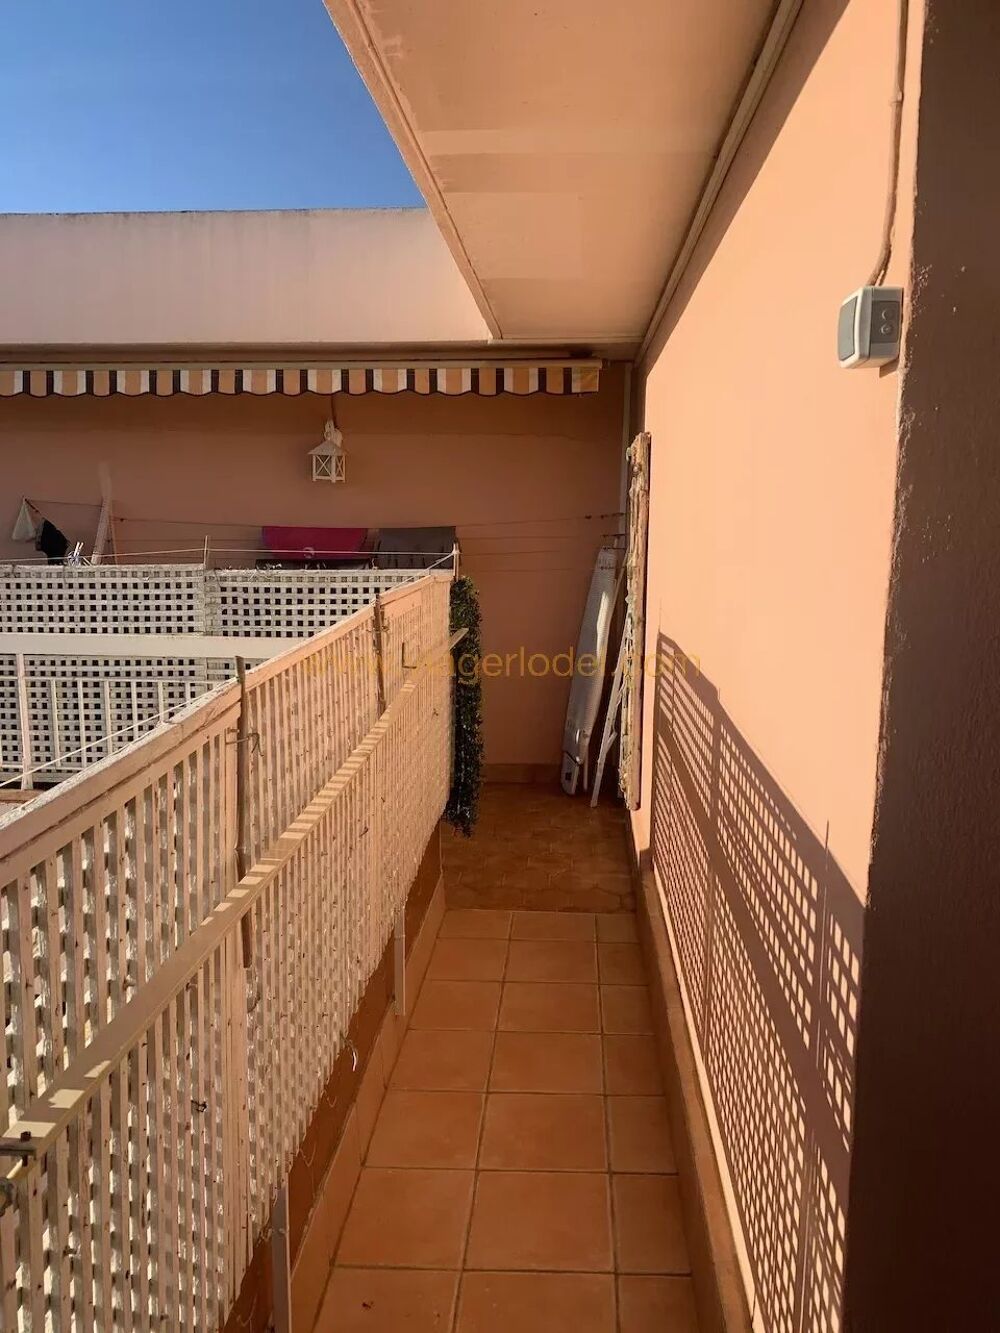 Vente Viager Rf. annonce : 9396 - VIAGER OCCUPE - JUAN LES PINS (06) Antibes